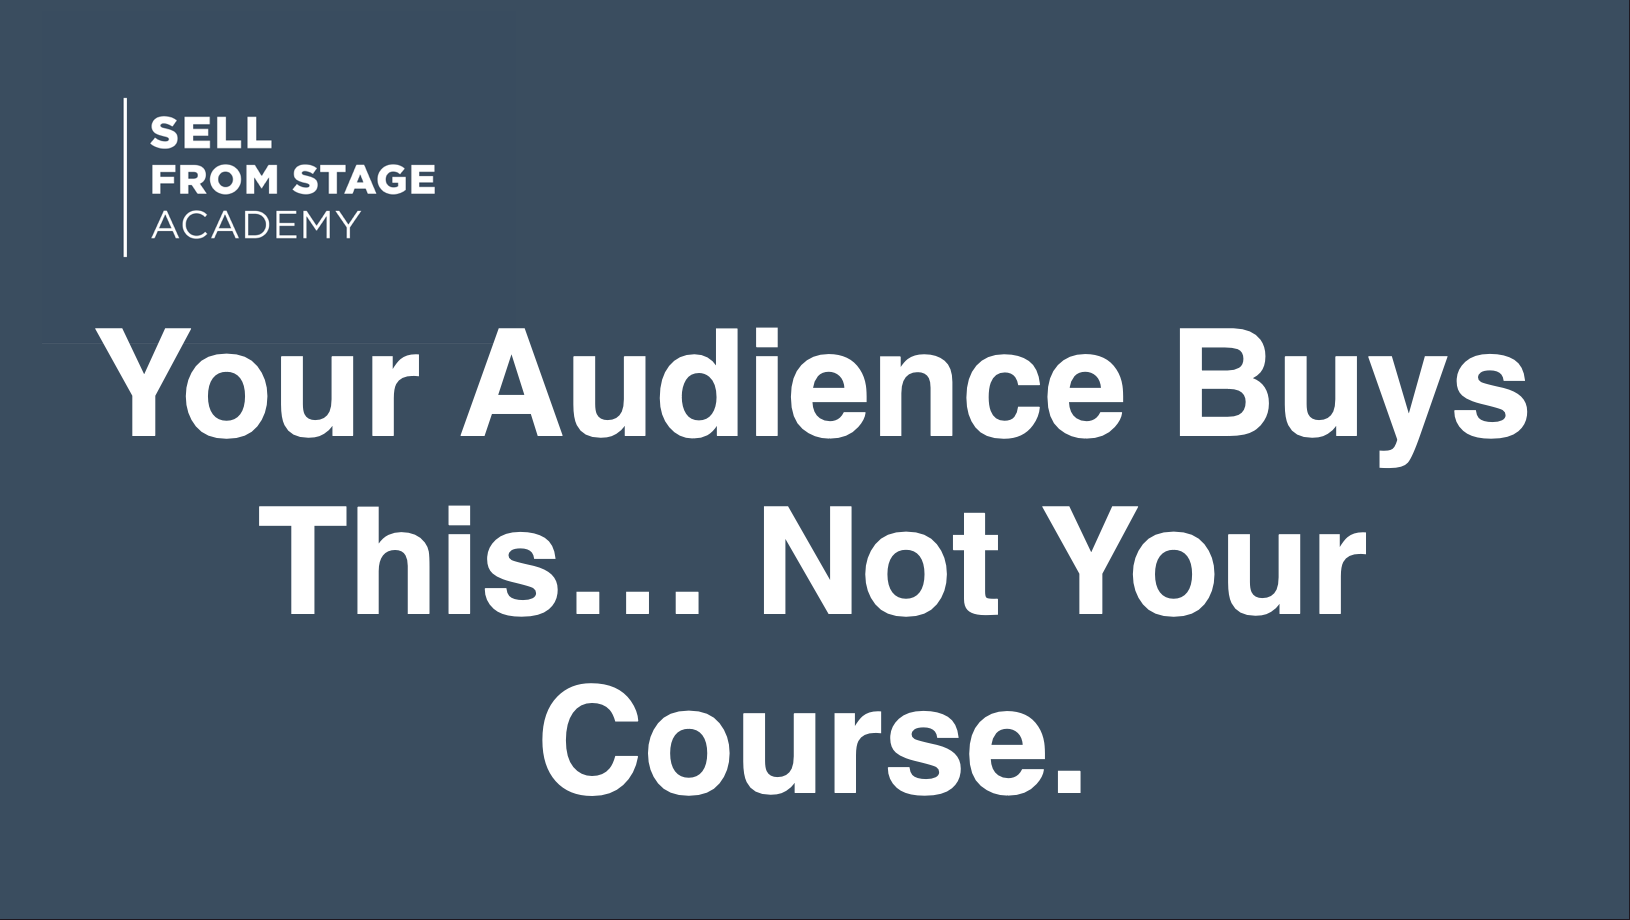 Your audience buys this… not your course.